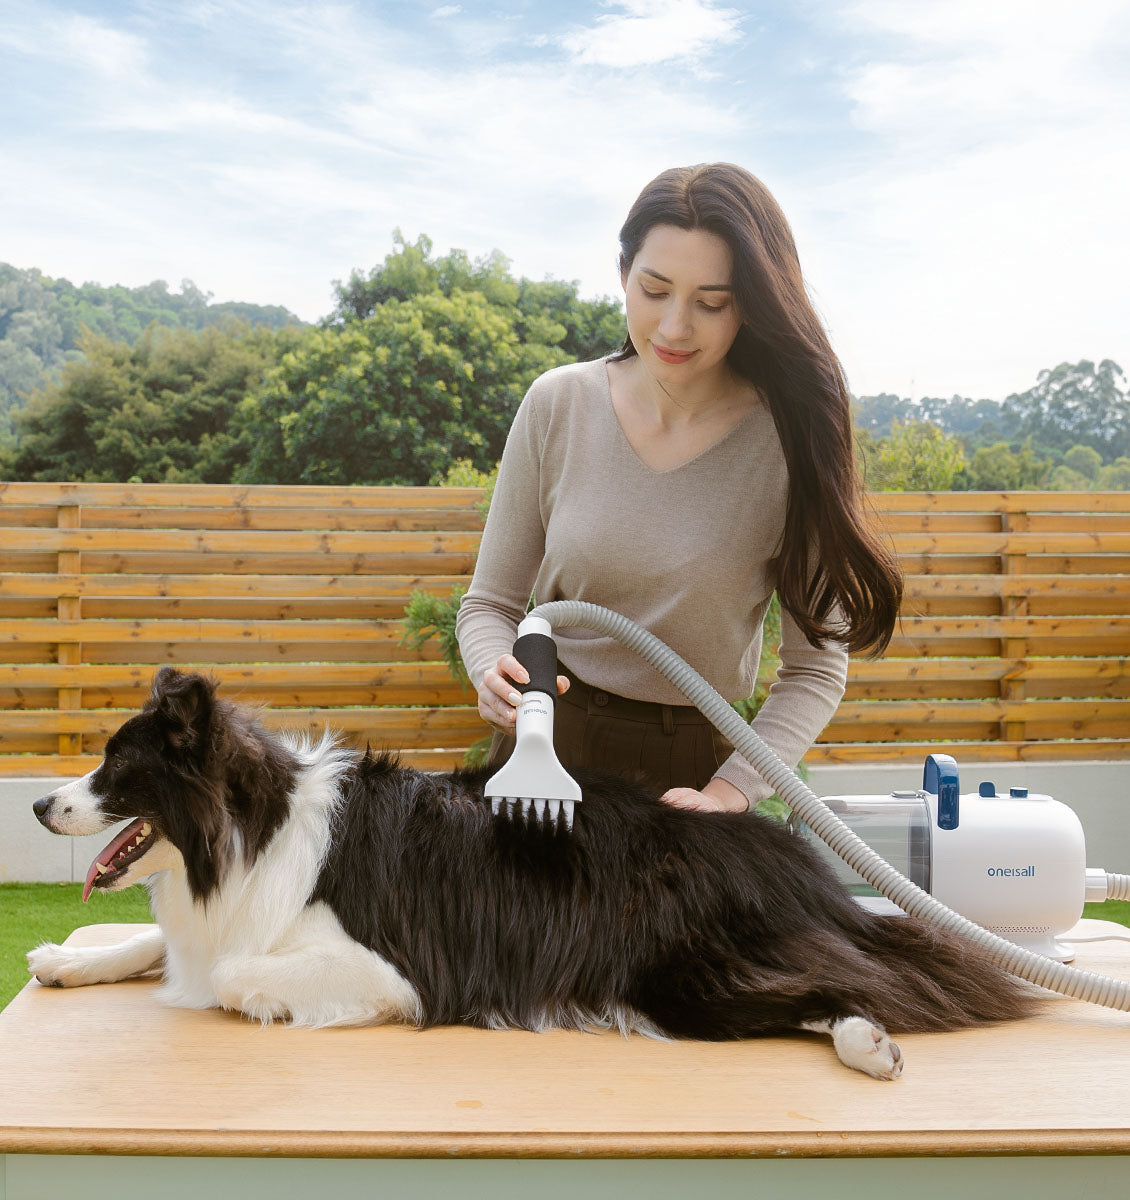 A Comprehensive Exploration of the Oneisall Dog Grooming Vacuum Kit: A Paradigm Shift in Pet Care